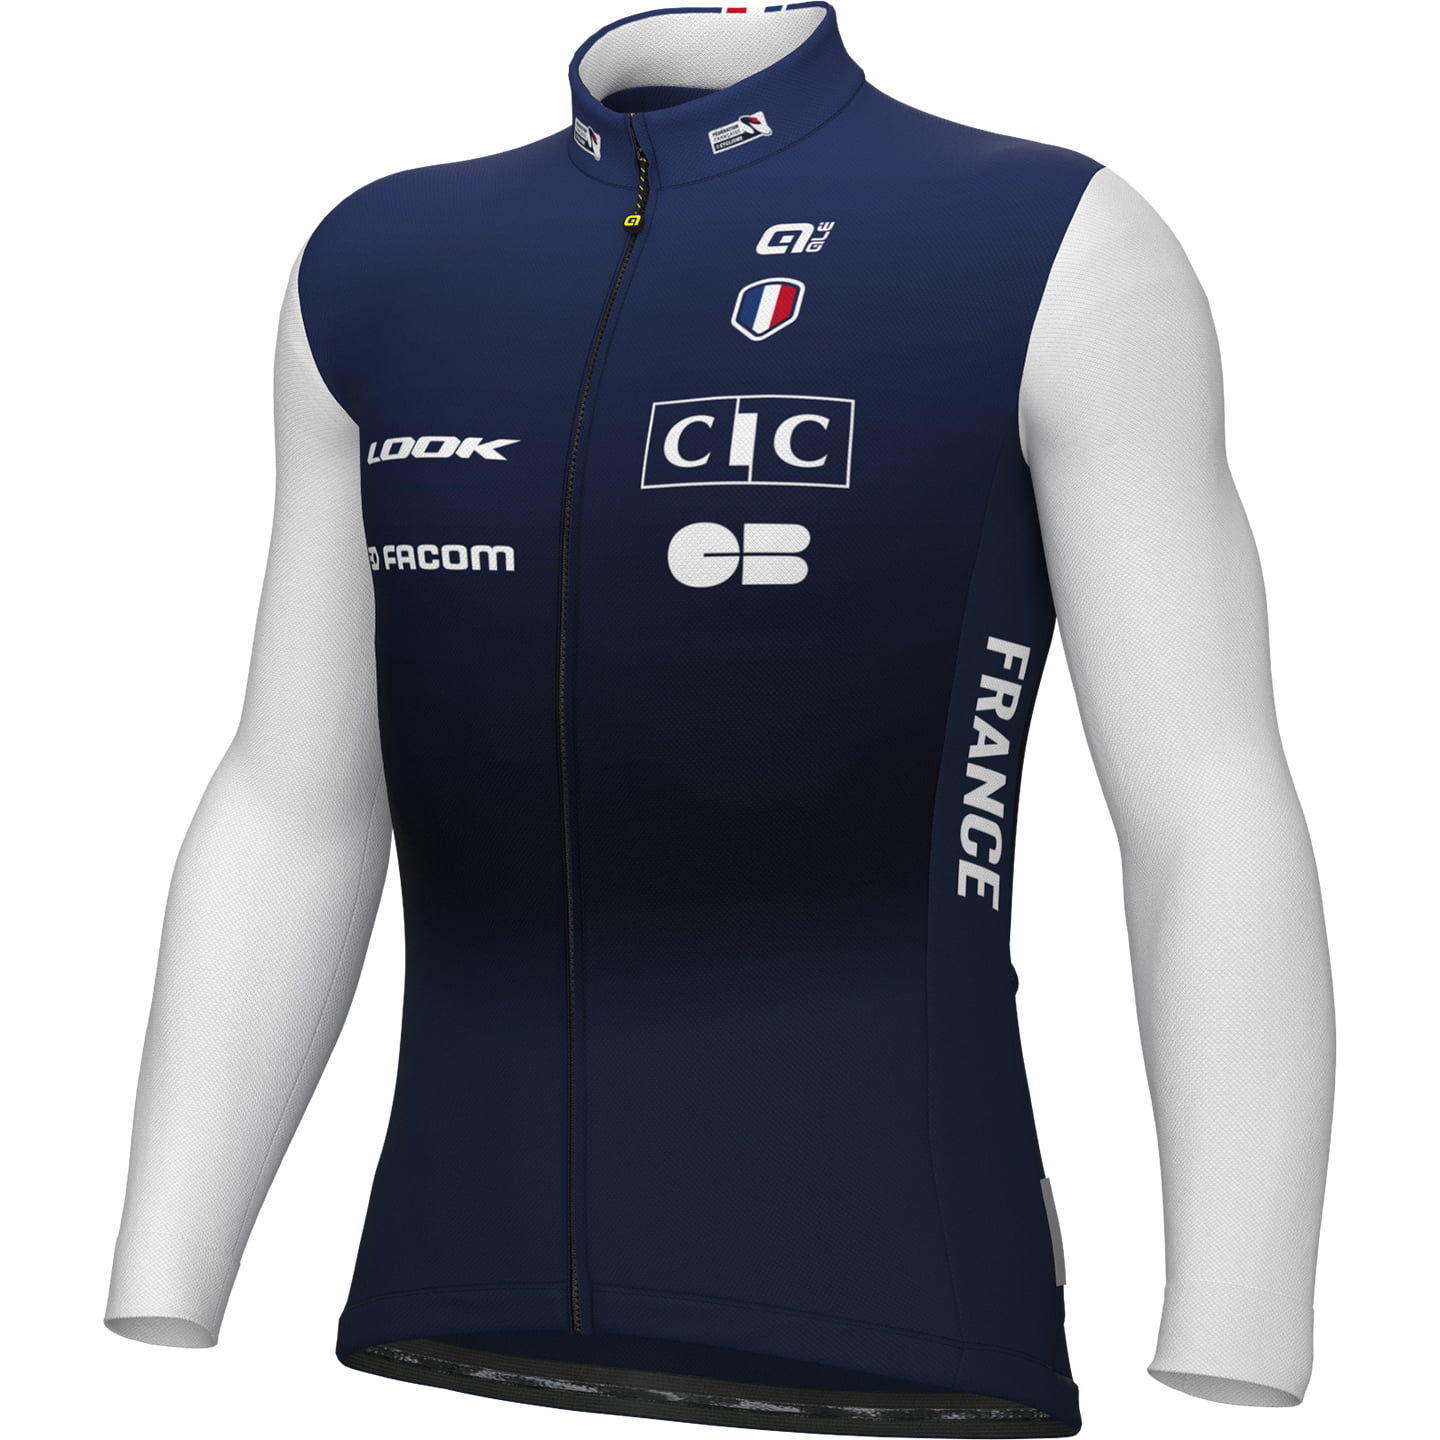 FRENCH NATIONAL TEAM 2024 Long Sleeve Jersey, for men, size L, Cycling shirt, Cycle clothing